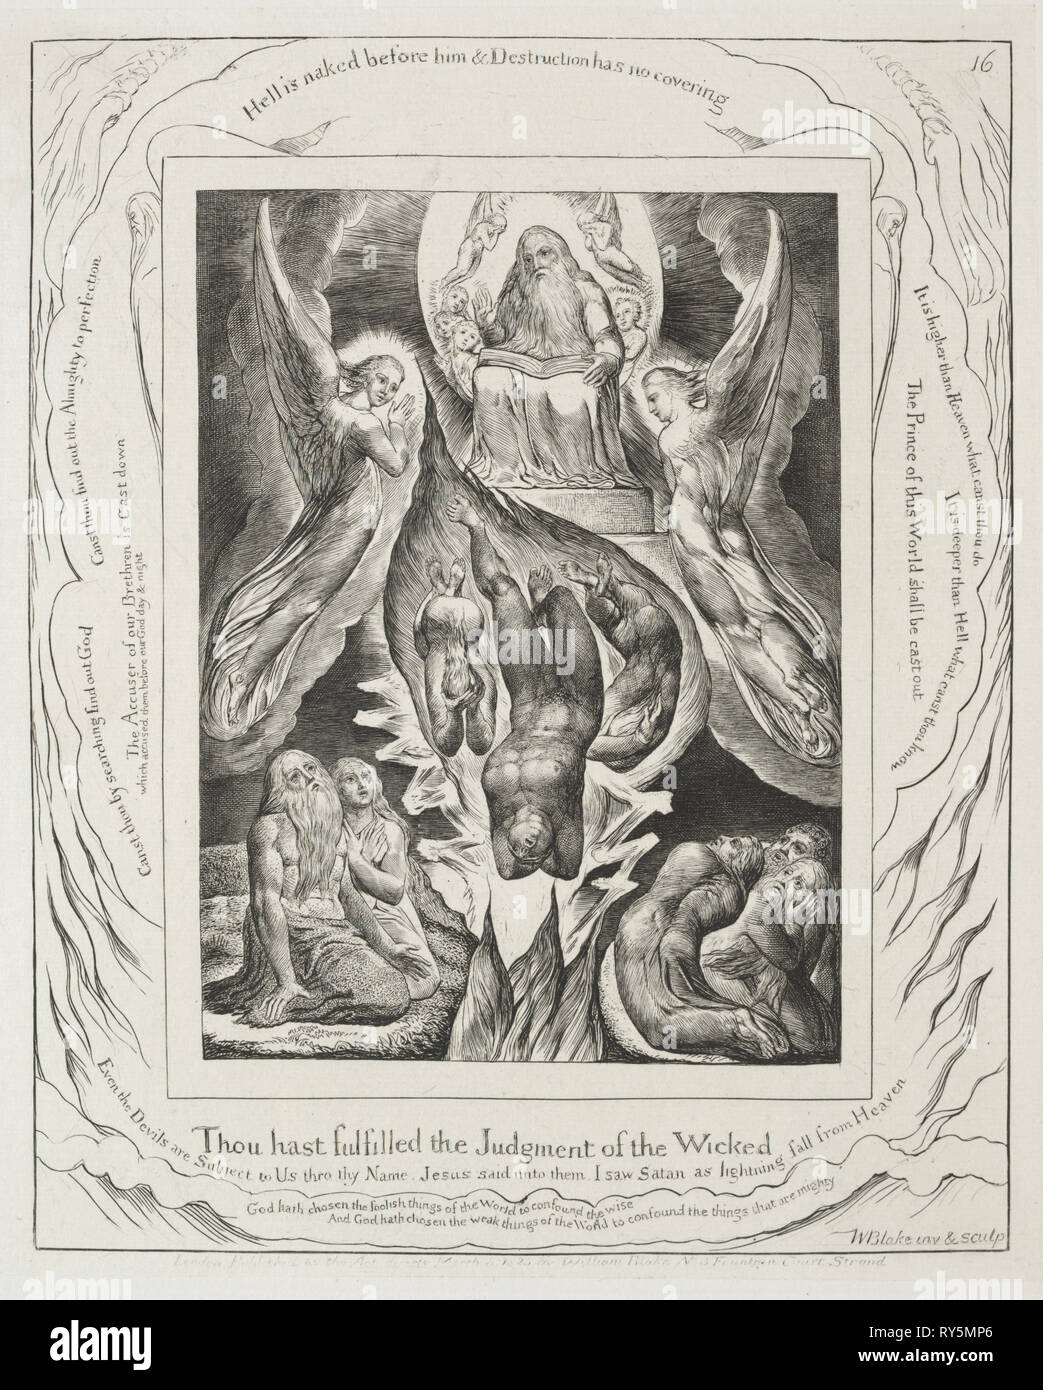 The Book of Job:  Pl. 16, Thou hast fulfilled the judgment of the wicked, 1825. William Blake (British, 1757-1827). Engraving Stock Photo